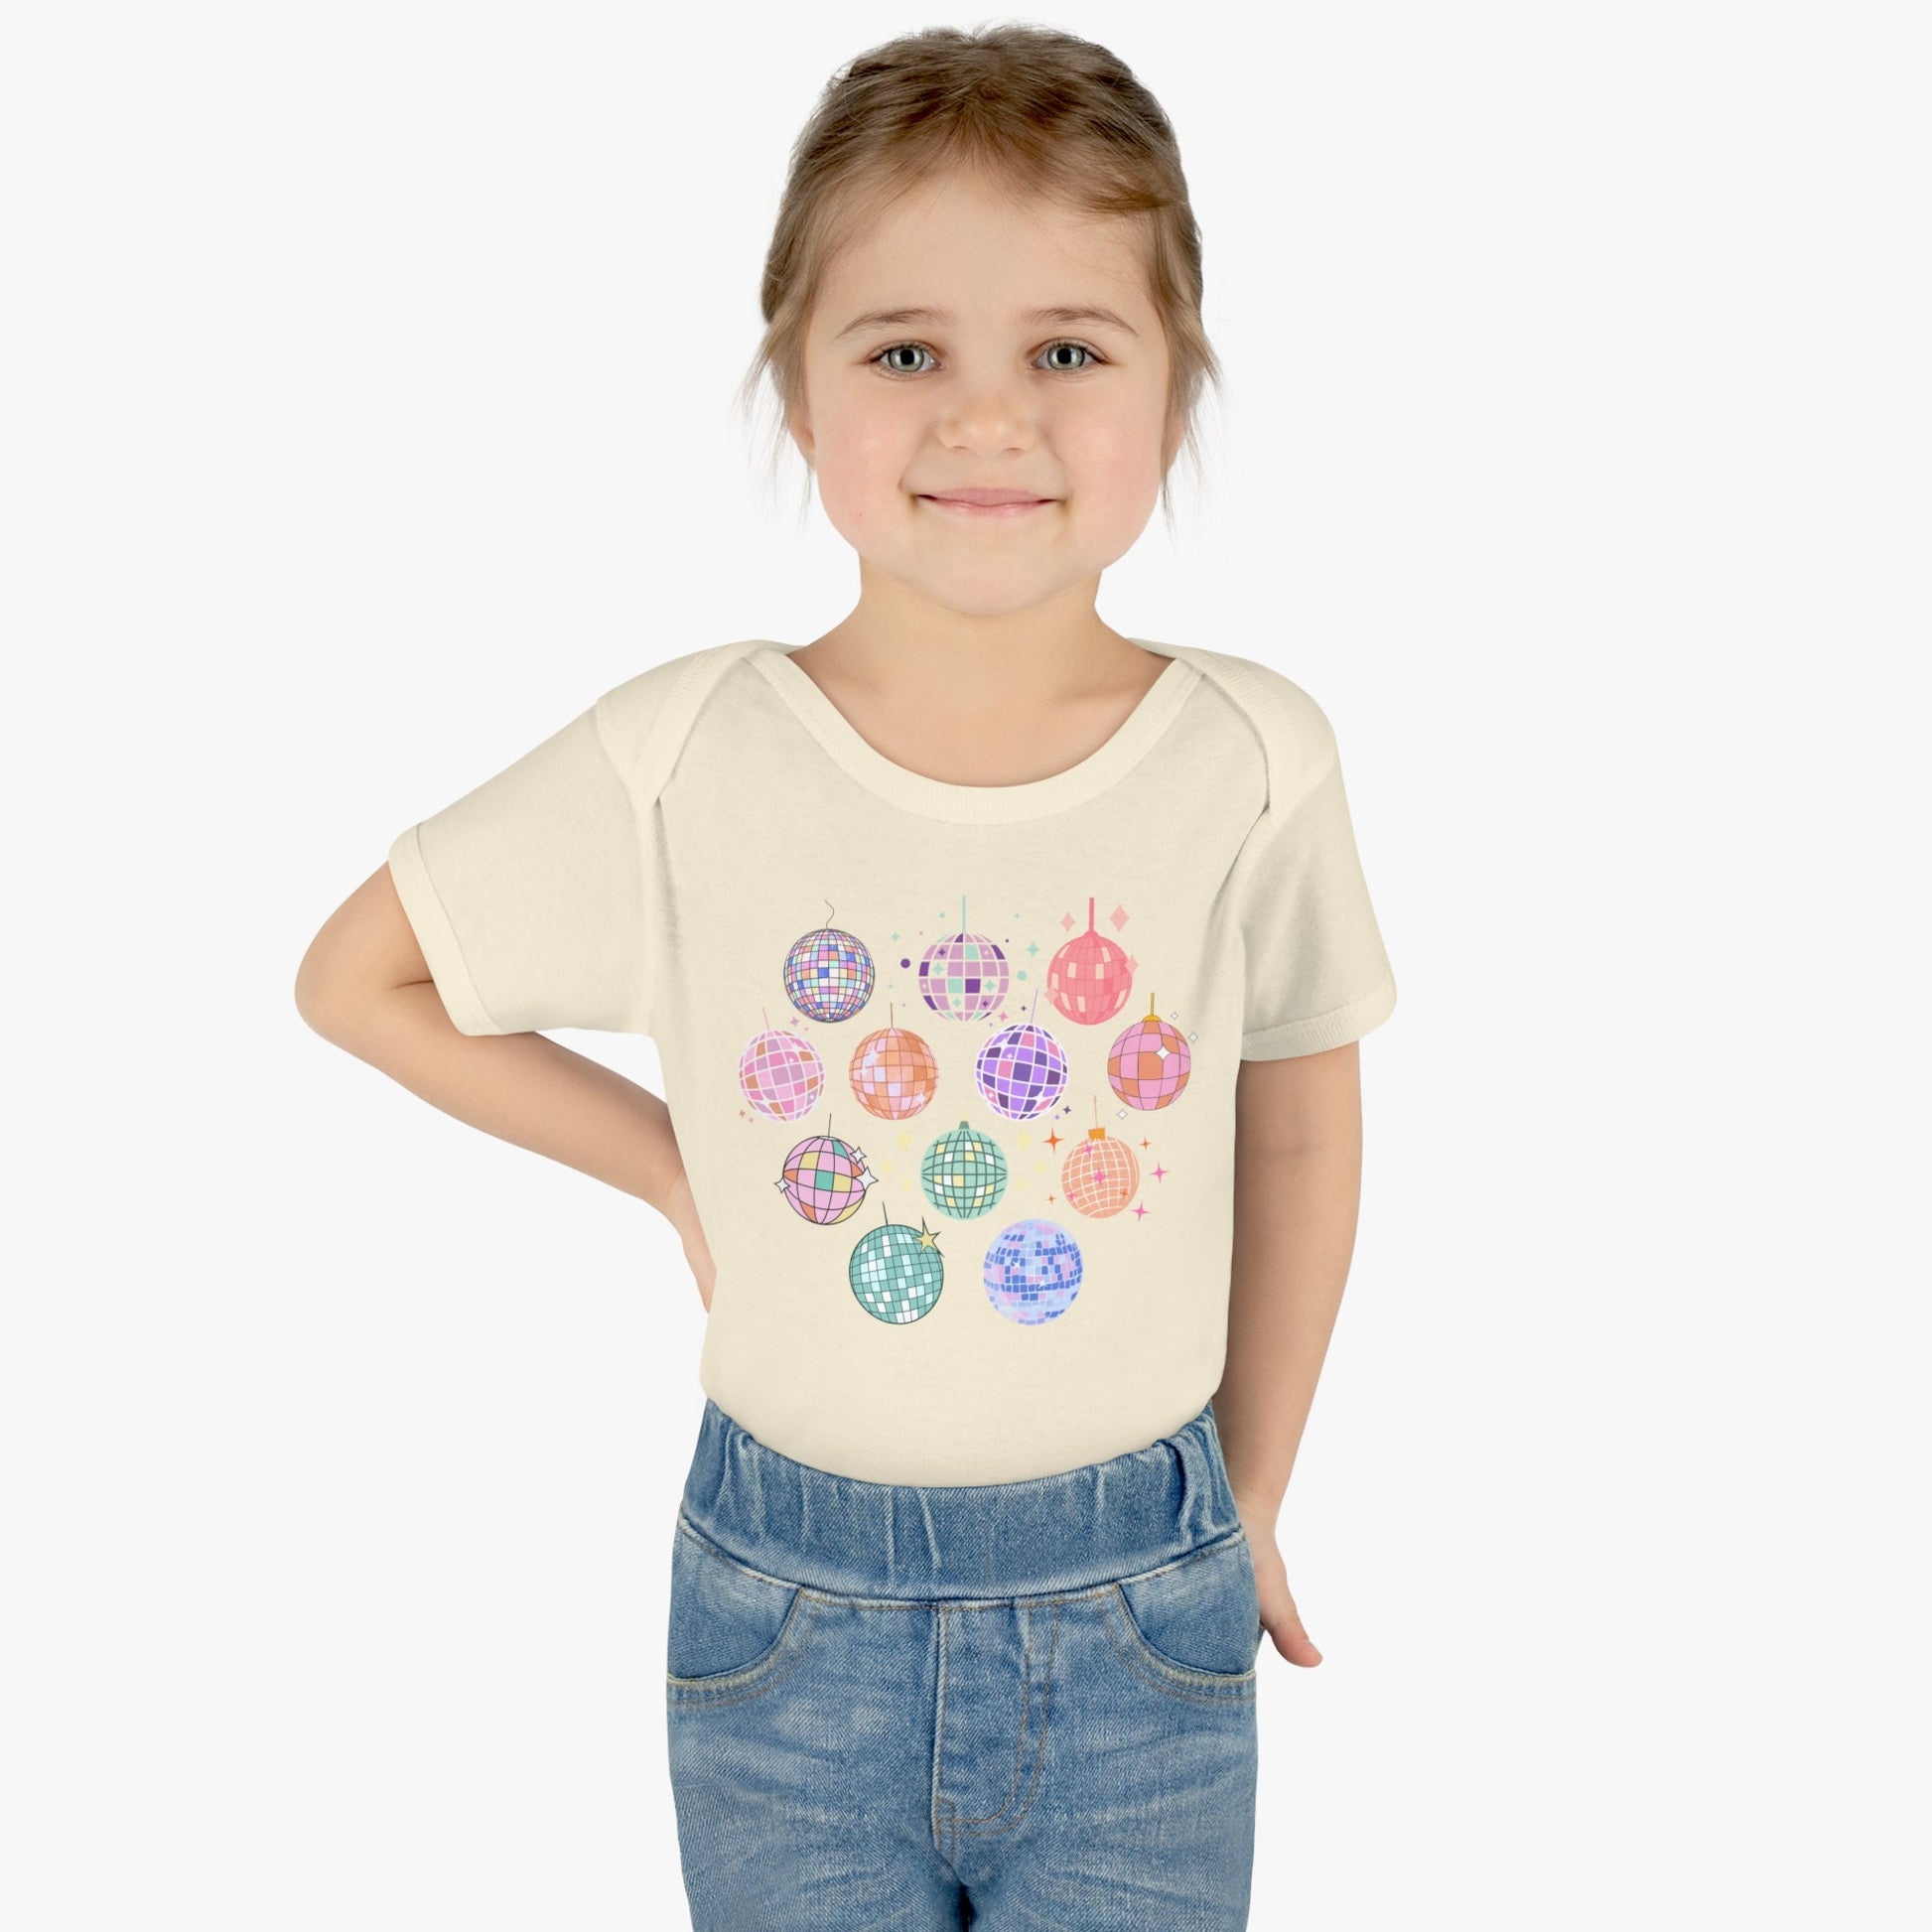 Disco Ball Baby Bodysuit, Retro Party Tee, Rainbow Shirts, Subtle Pride Outfit, Mirrorball Sweatshirt, Cute Womens Tops for Summer